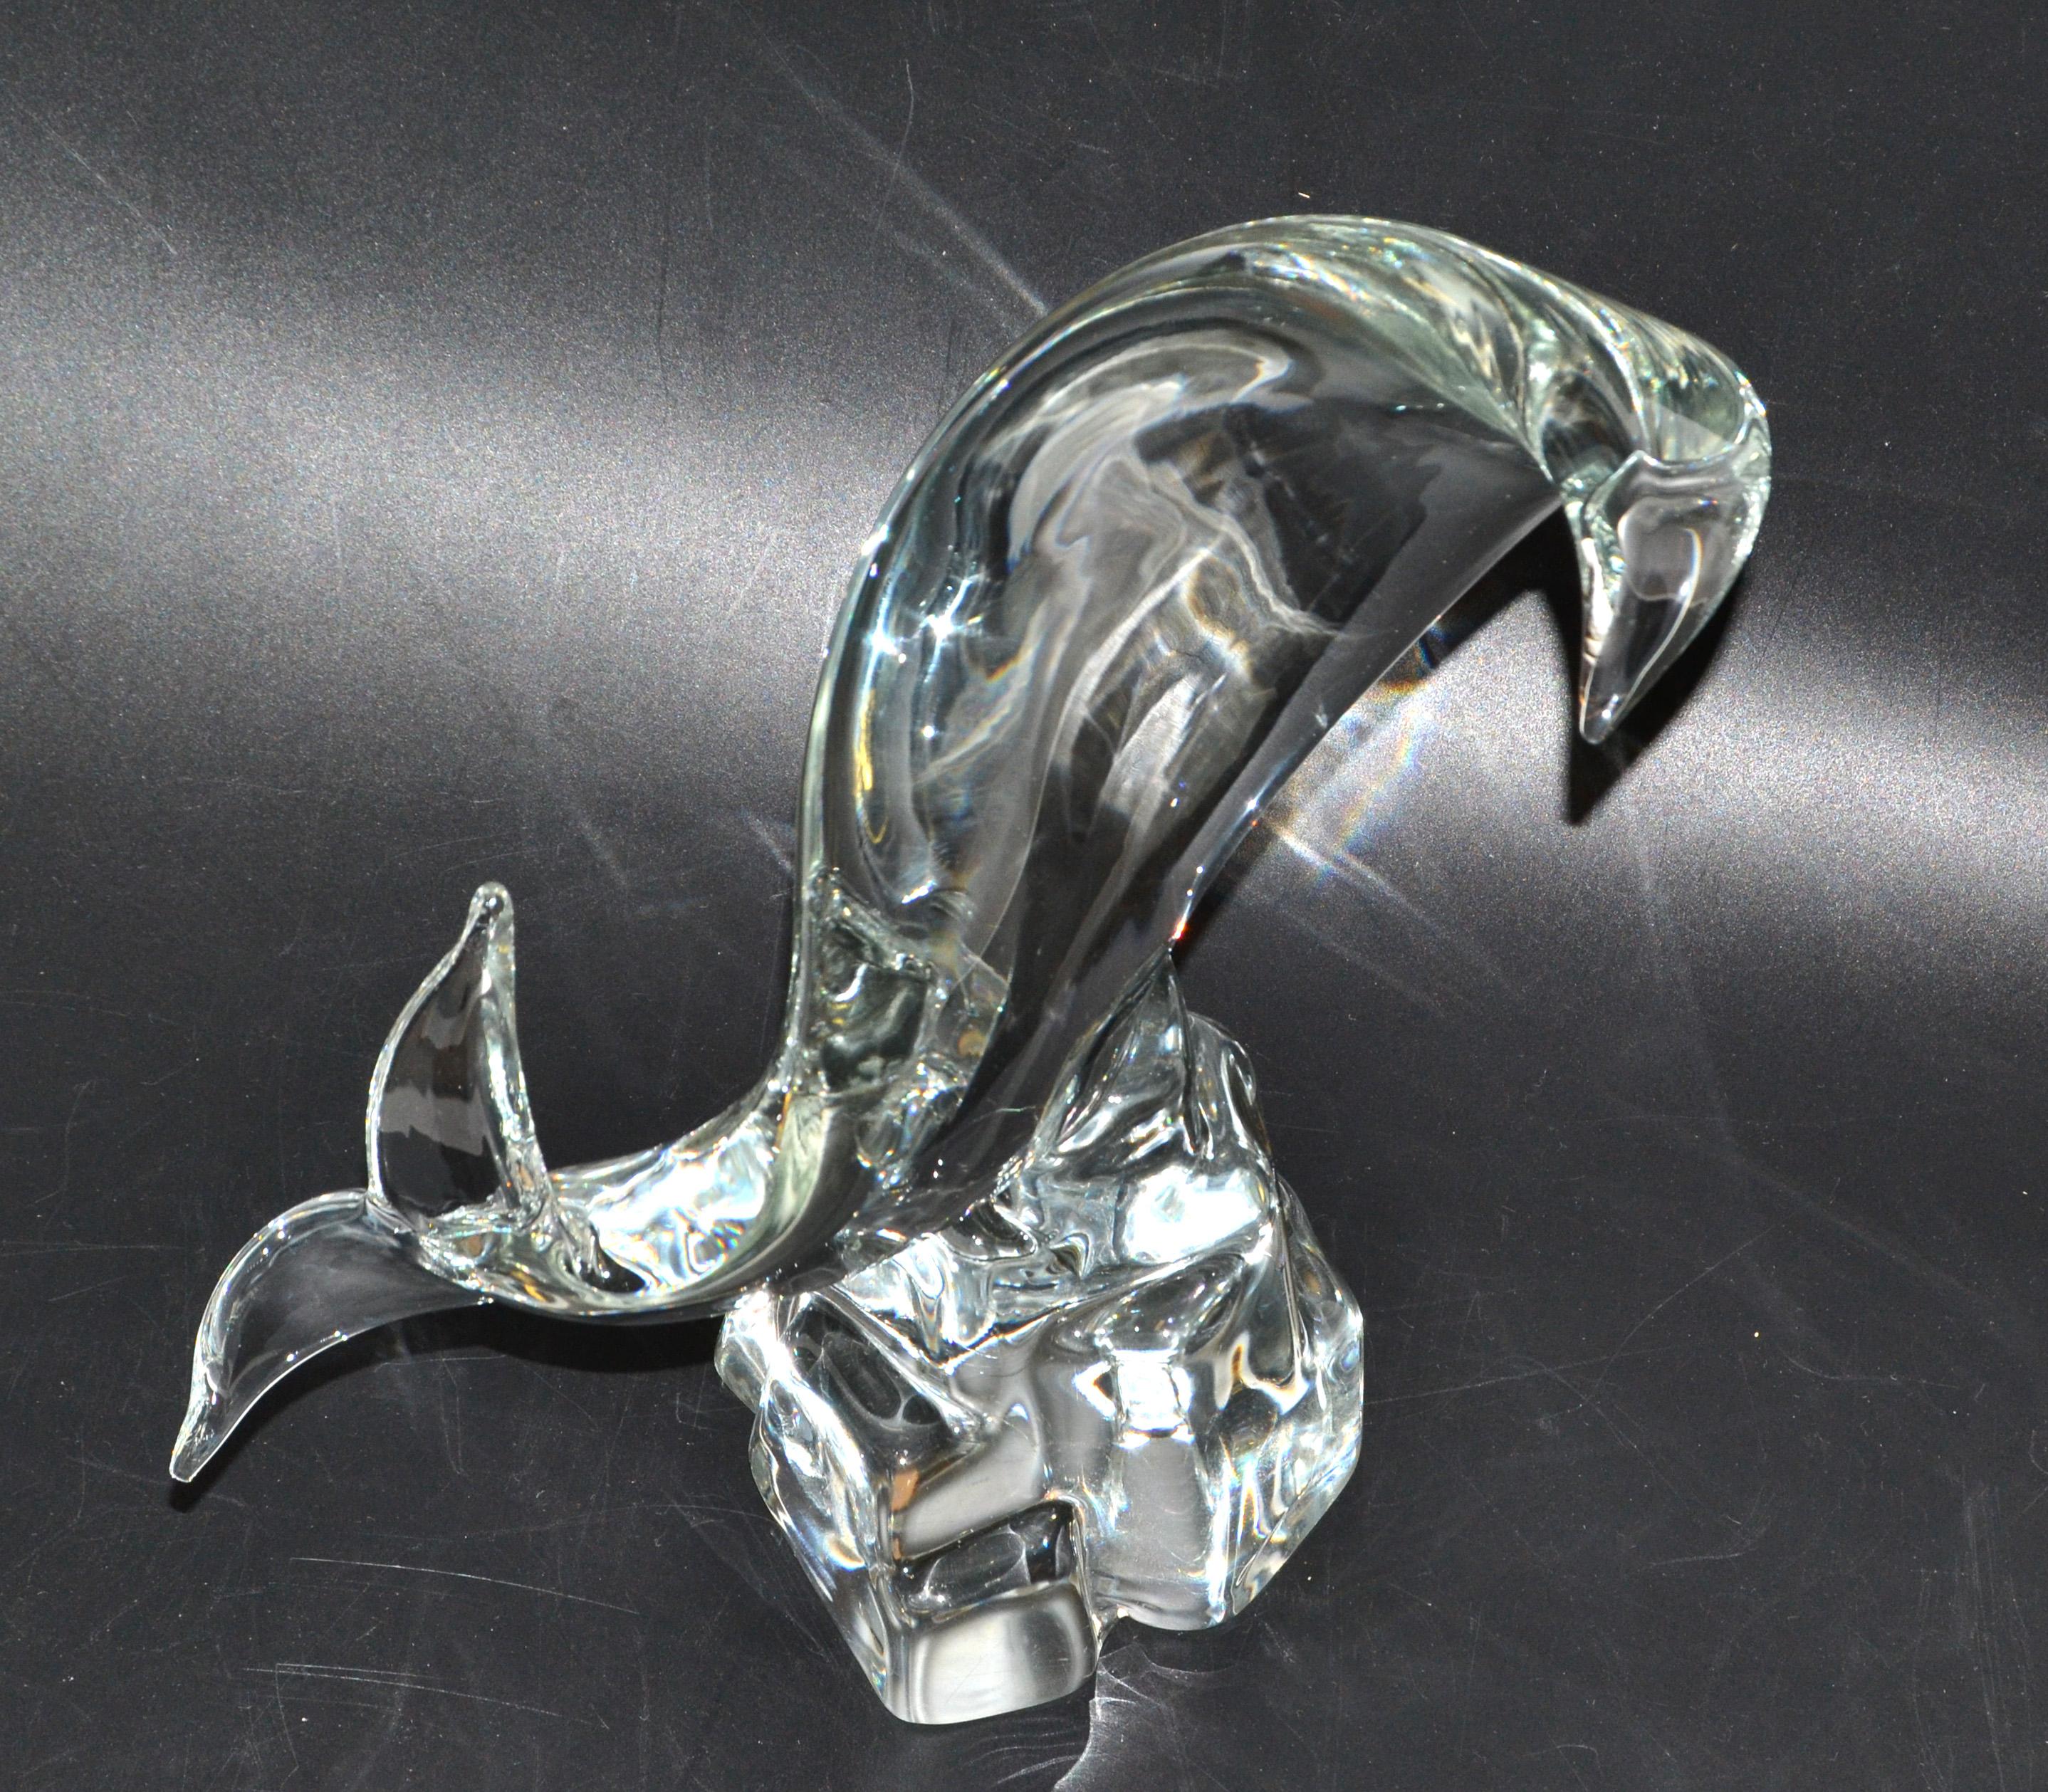 Licio Zanetti abstract murano glass Fish, Whale or Dolphin Sculpture stylized on a hand carved glass rock.
Made with the Massello Technique, developed by Flavio Poli in the 1920s, using one solid block of glass.
Produced in Murano at Zanetti